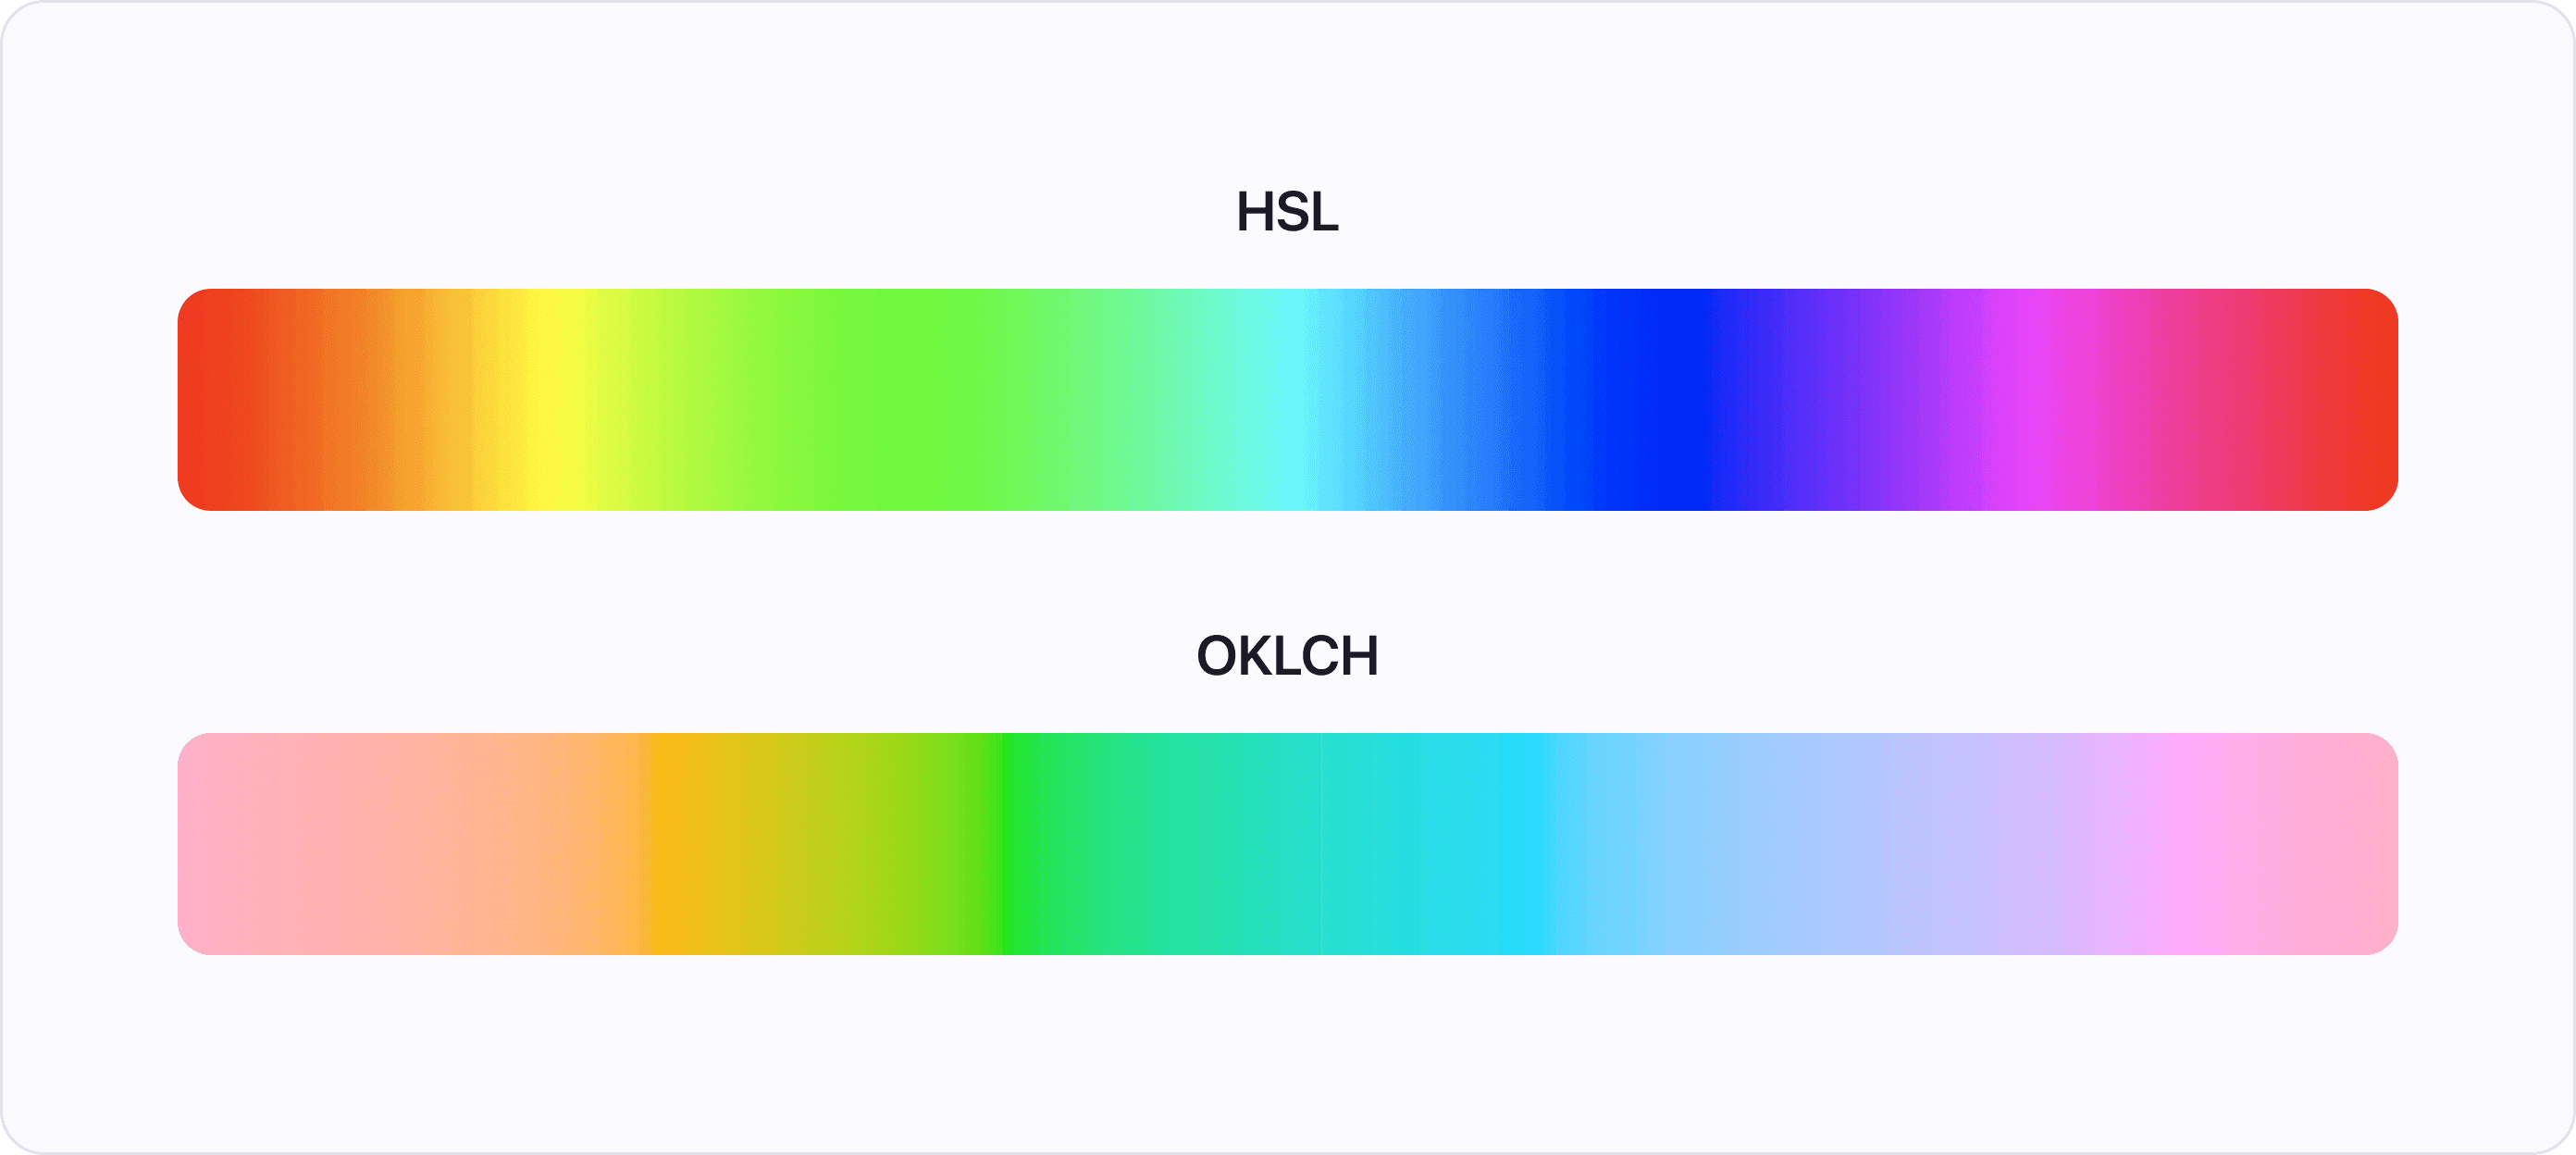 HSL and OKLCH hues comparison